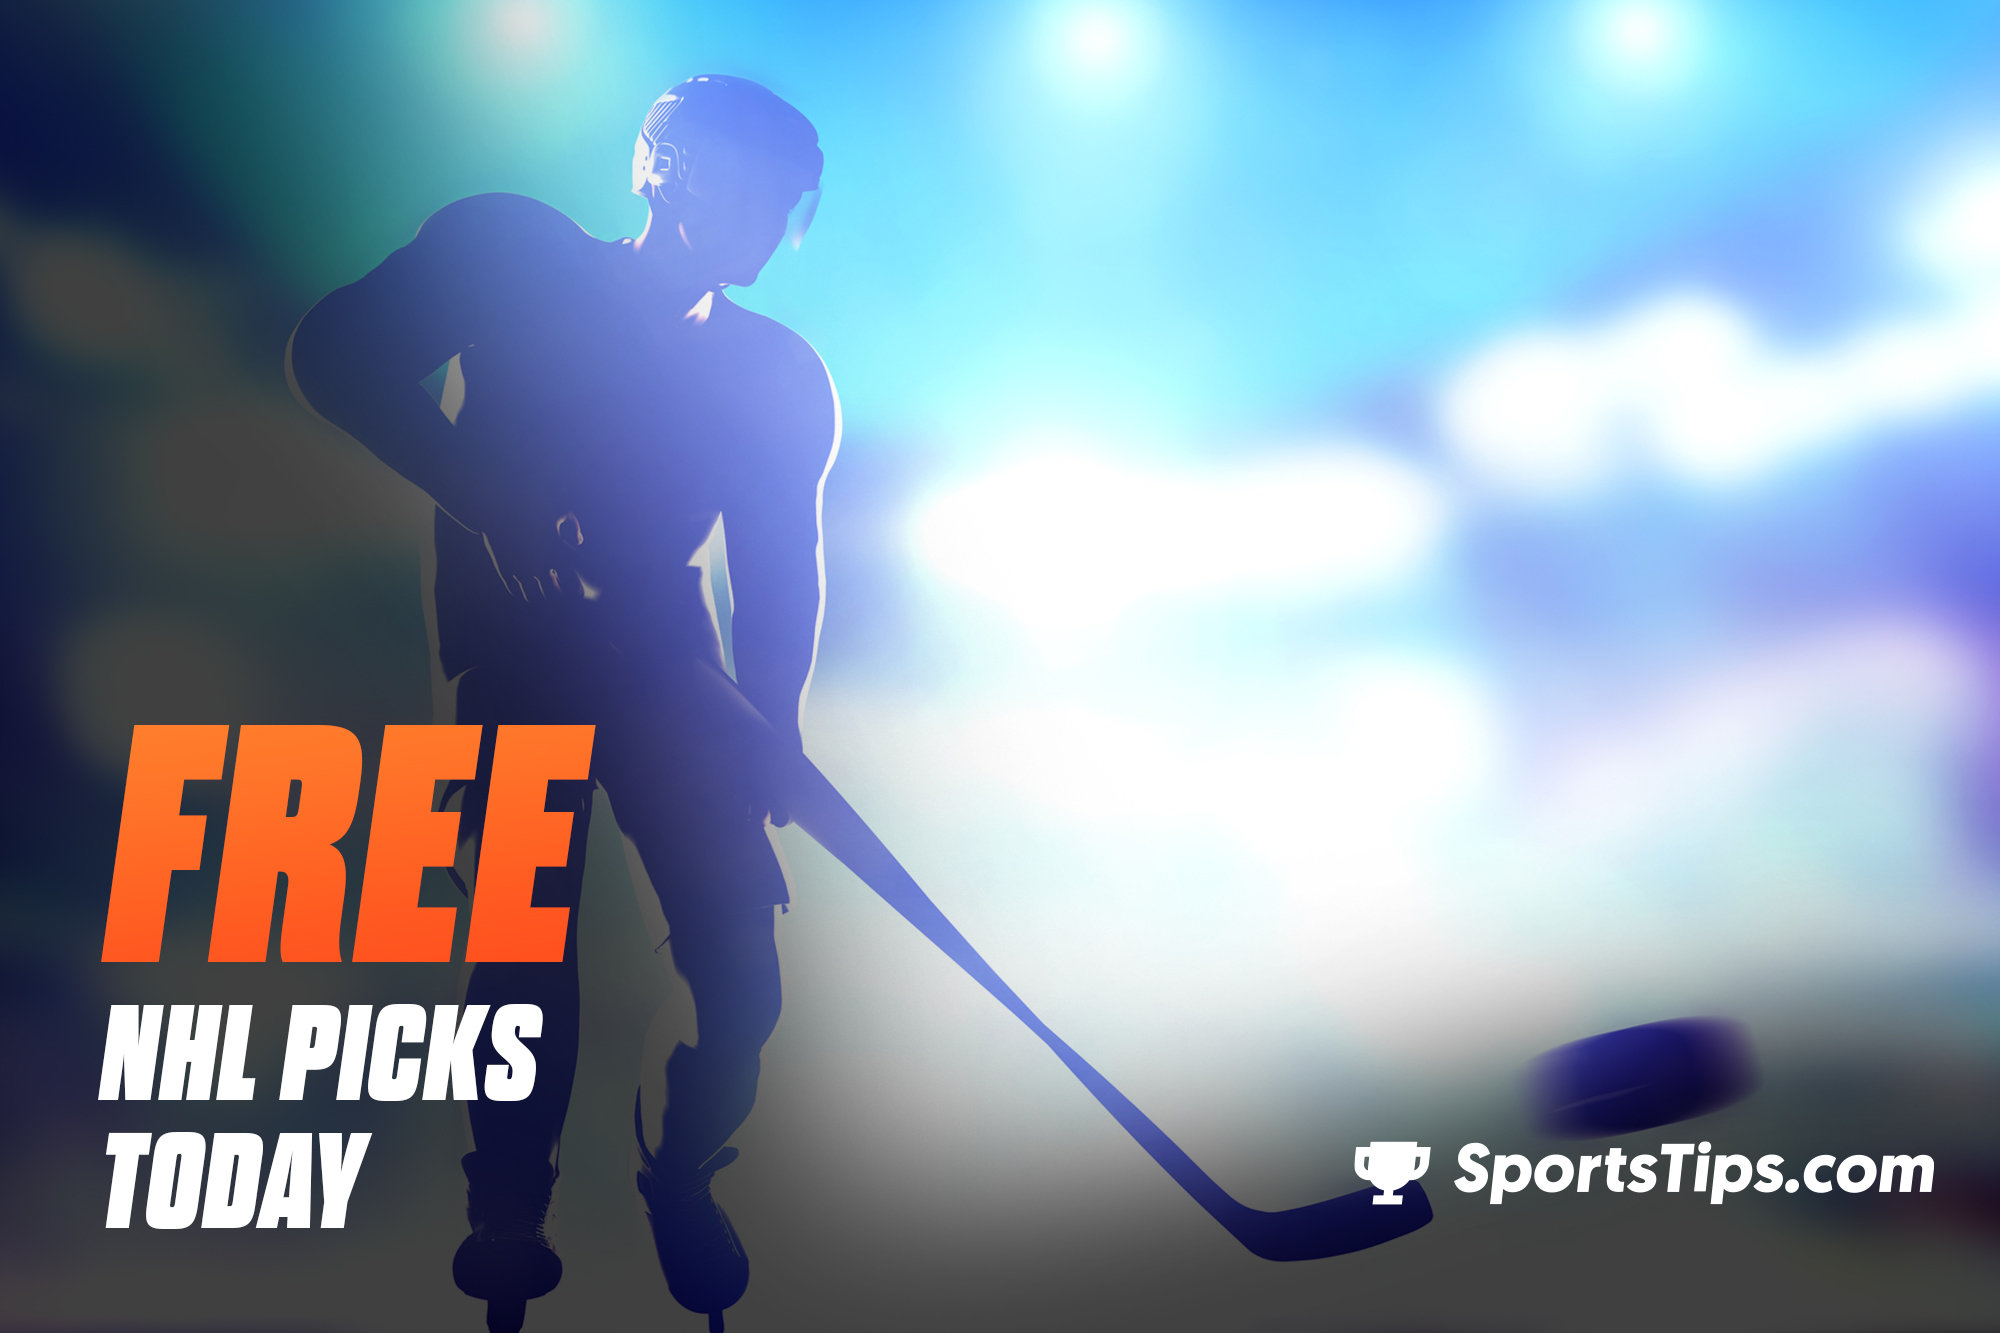 NHL Playoffs Round 2: Free NHL Picks Today for Friday, May 27th, 2022